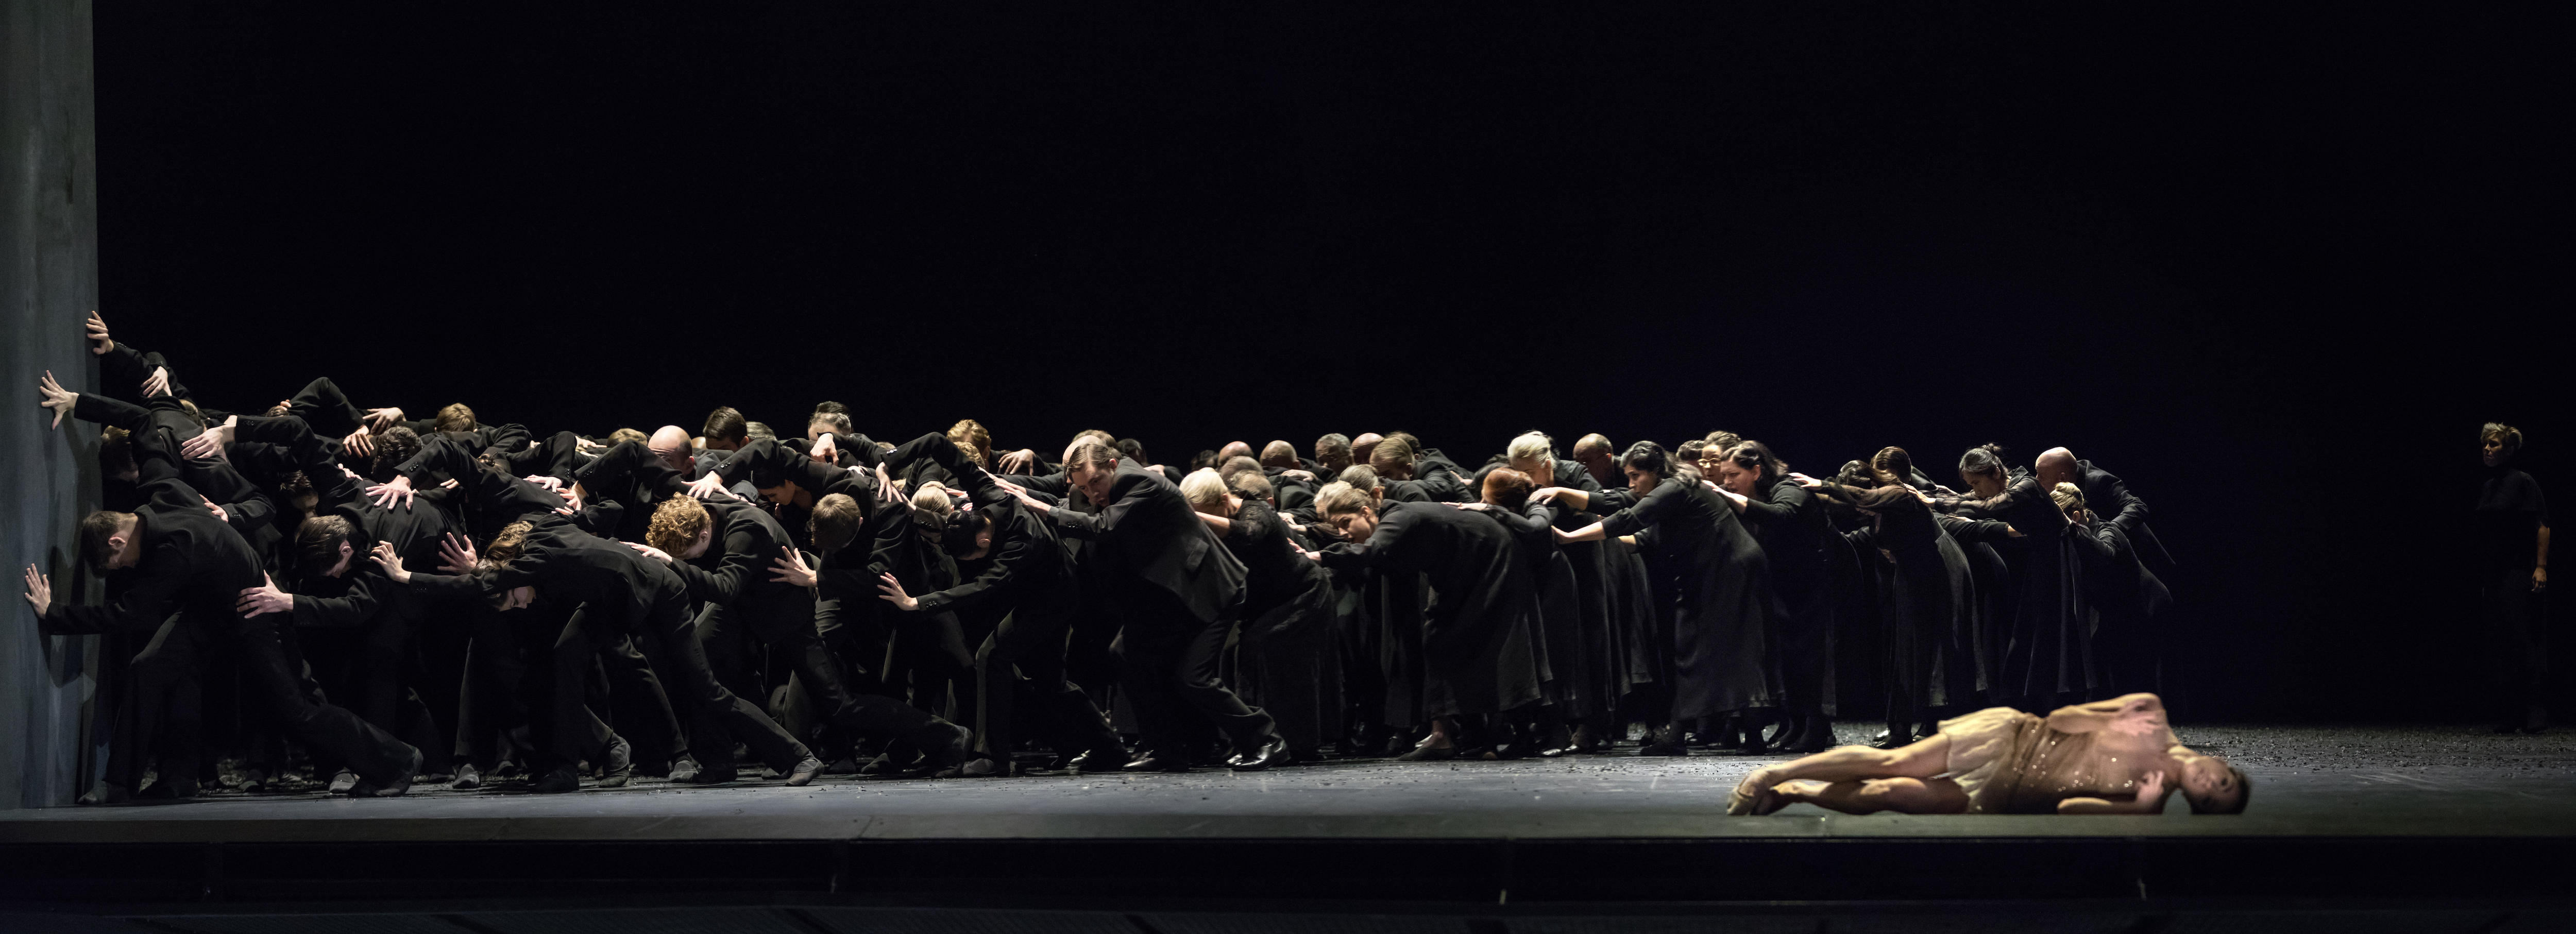 About 50 dancers in black form a chain pushing a wall on a stage with a single dancer in a beige costume lying in front of them